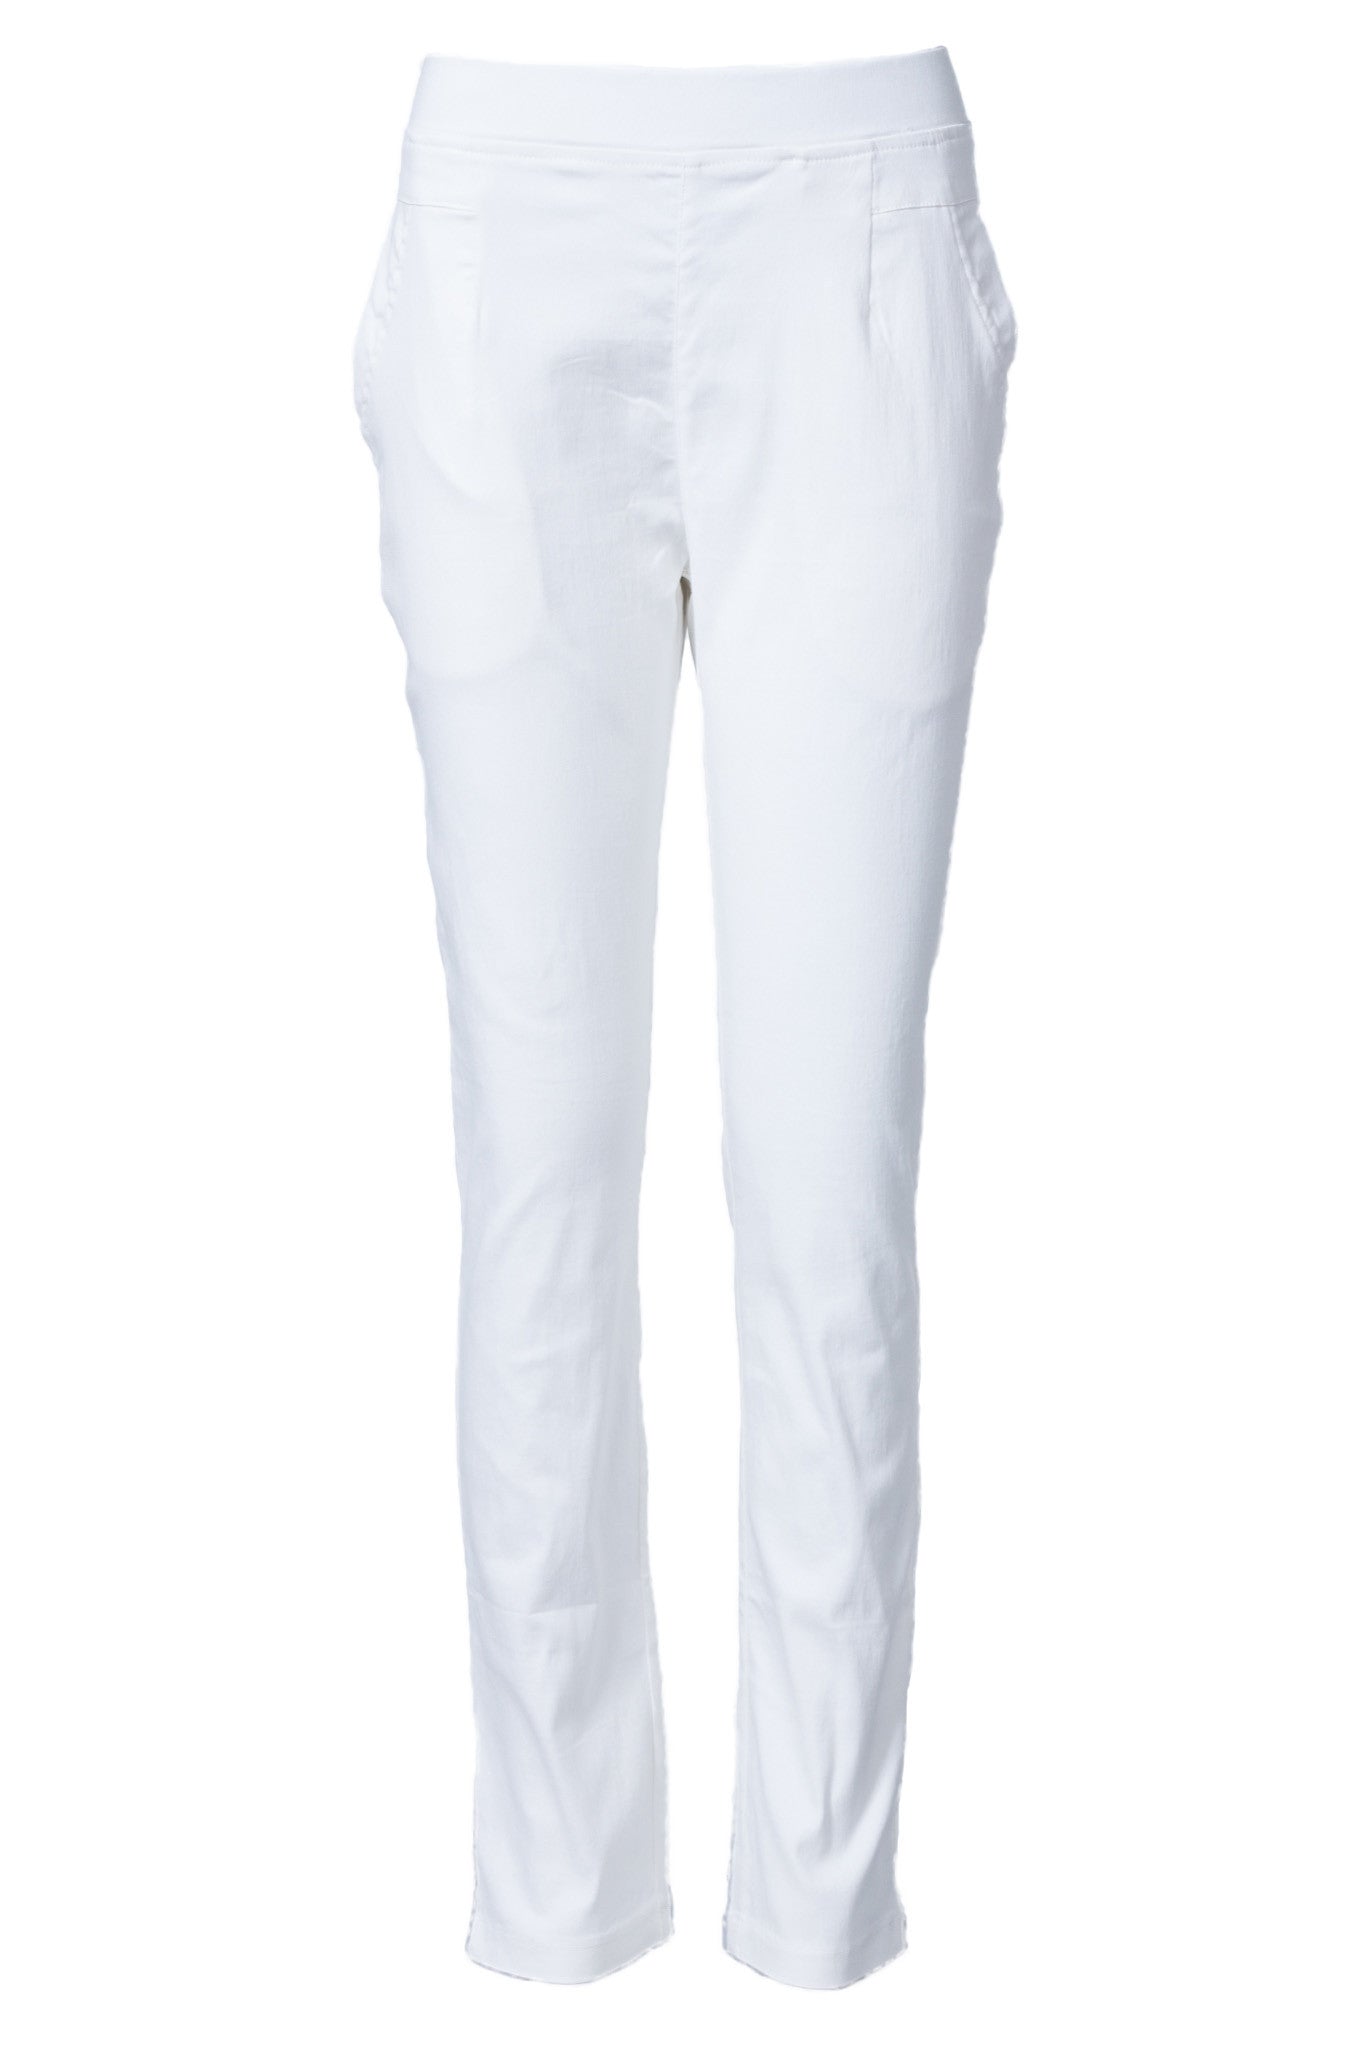 Pant without Zipper - White